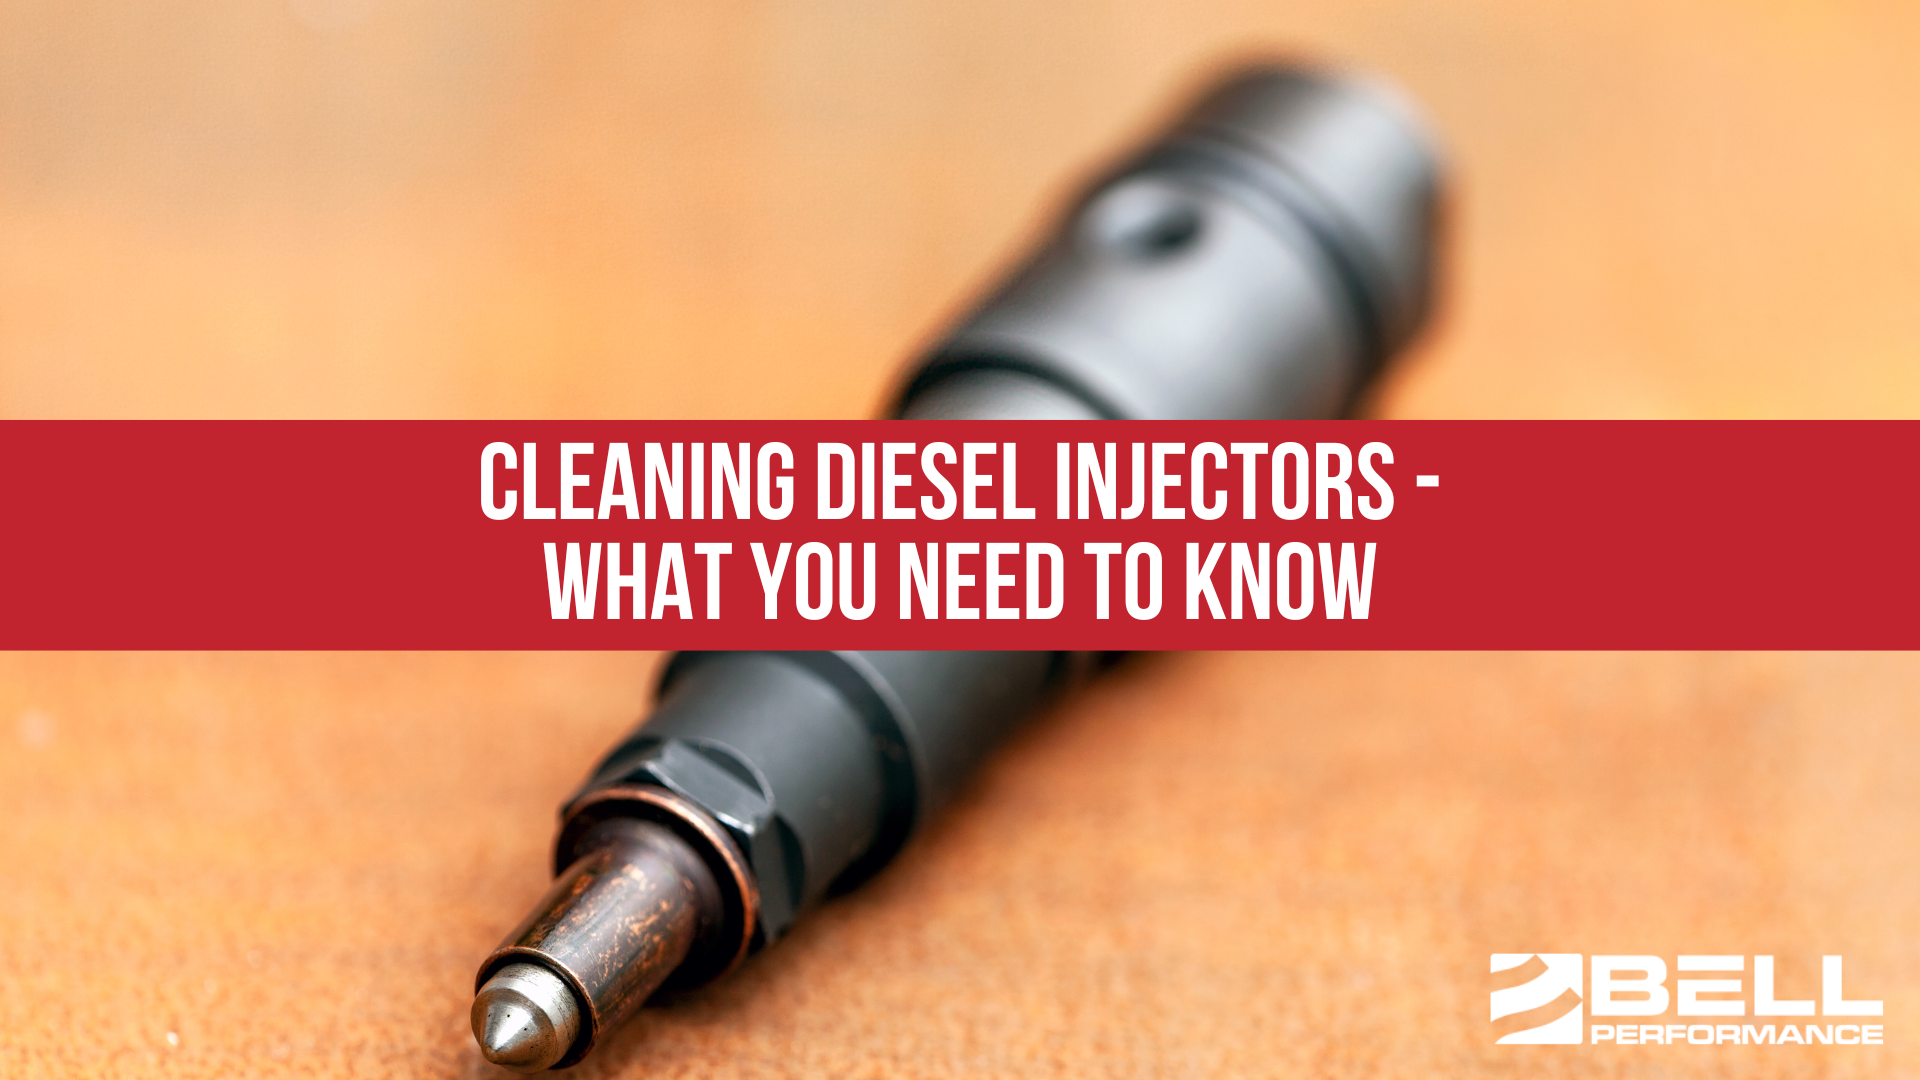 Cleaning Diesel Injectors - What You Need to Know